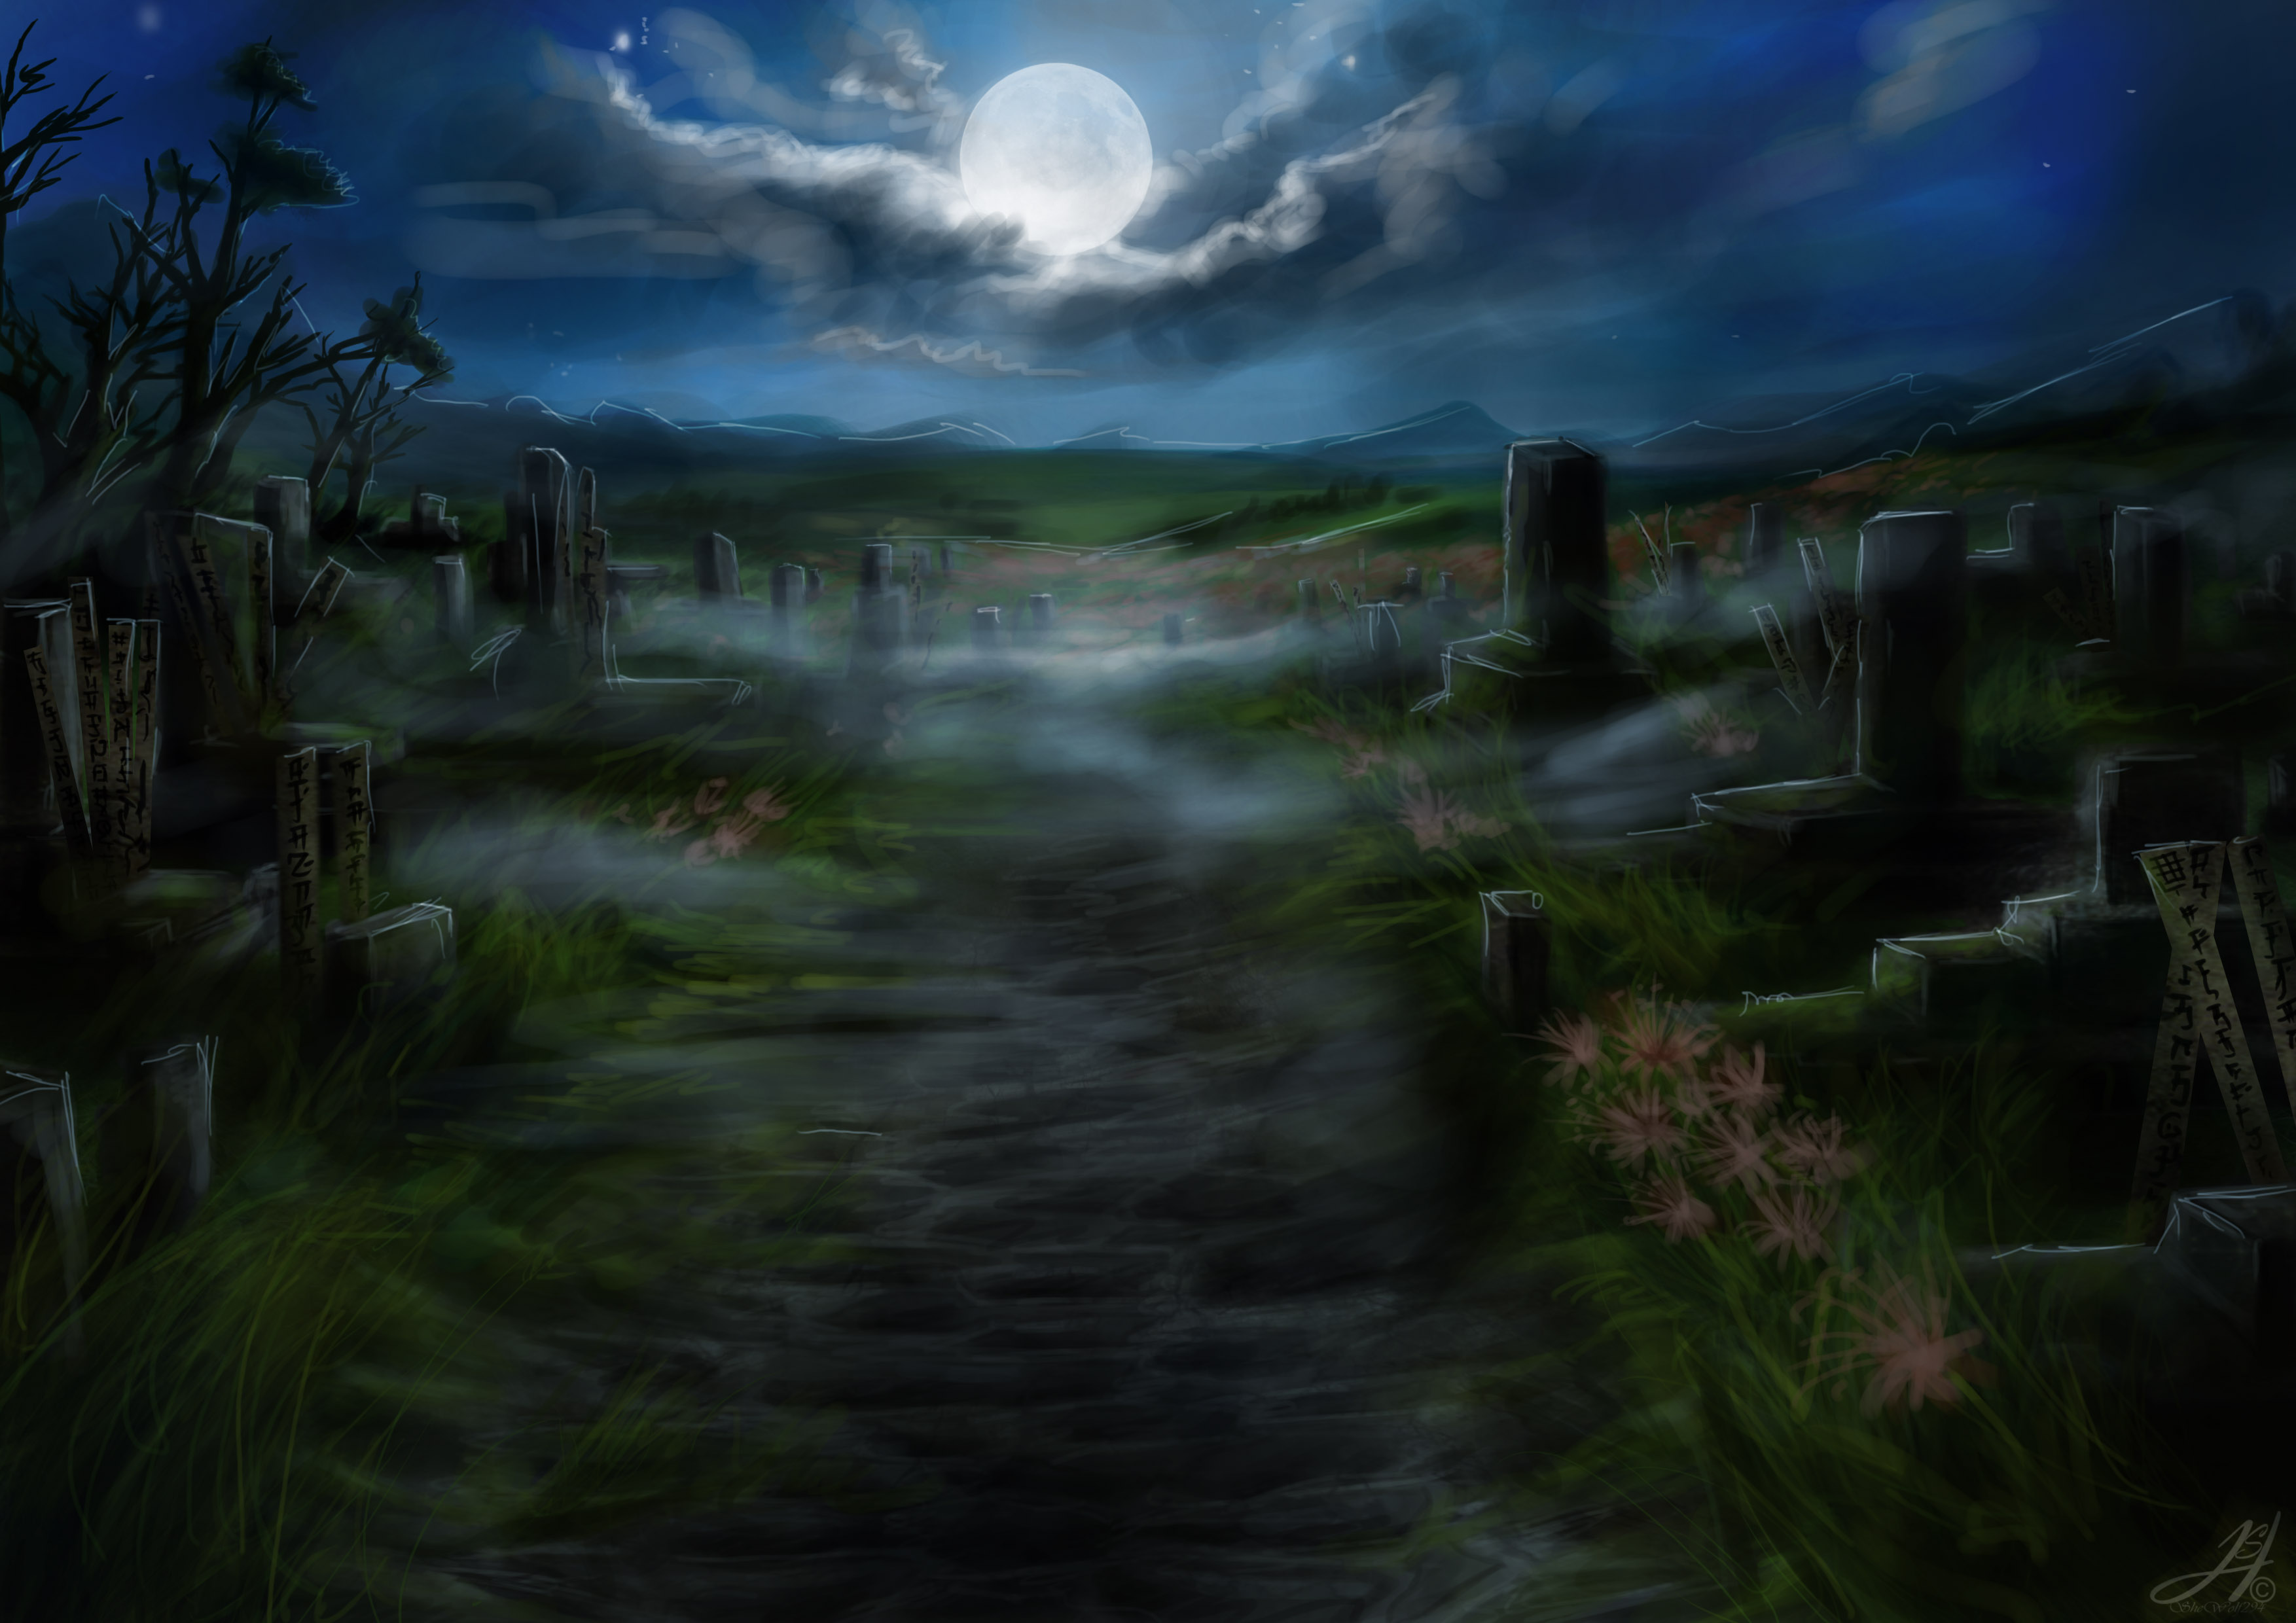 Full Moon over Cemetery by Arkarti